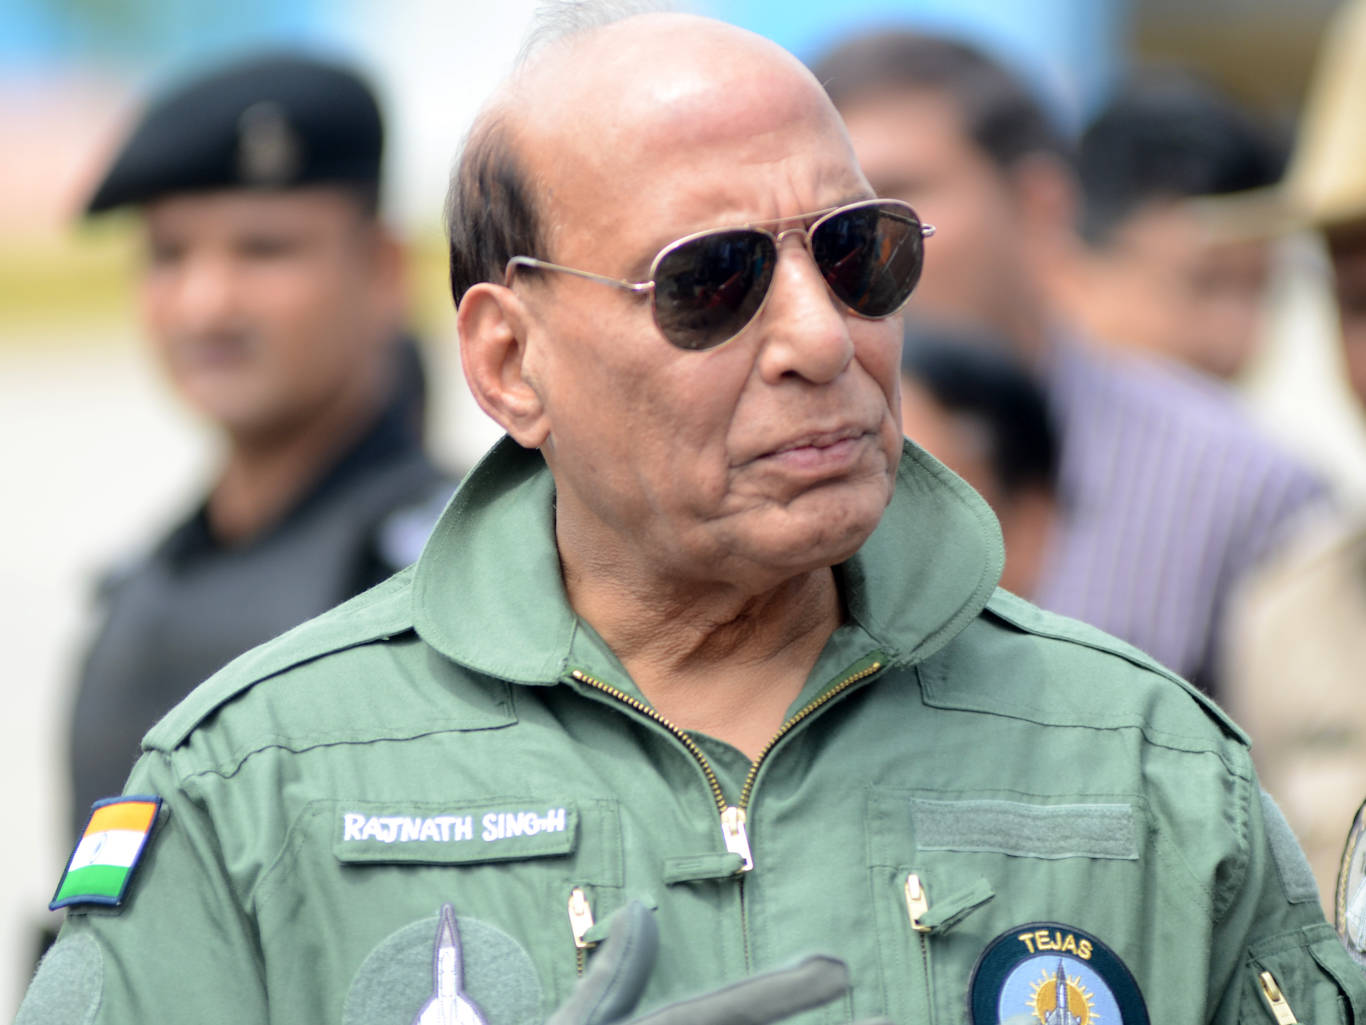 Rajnath singh profile, interesting facts, all you need to know about